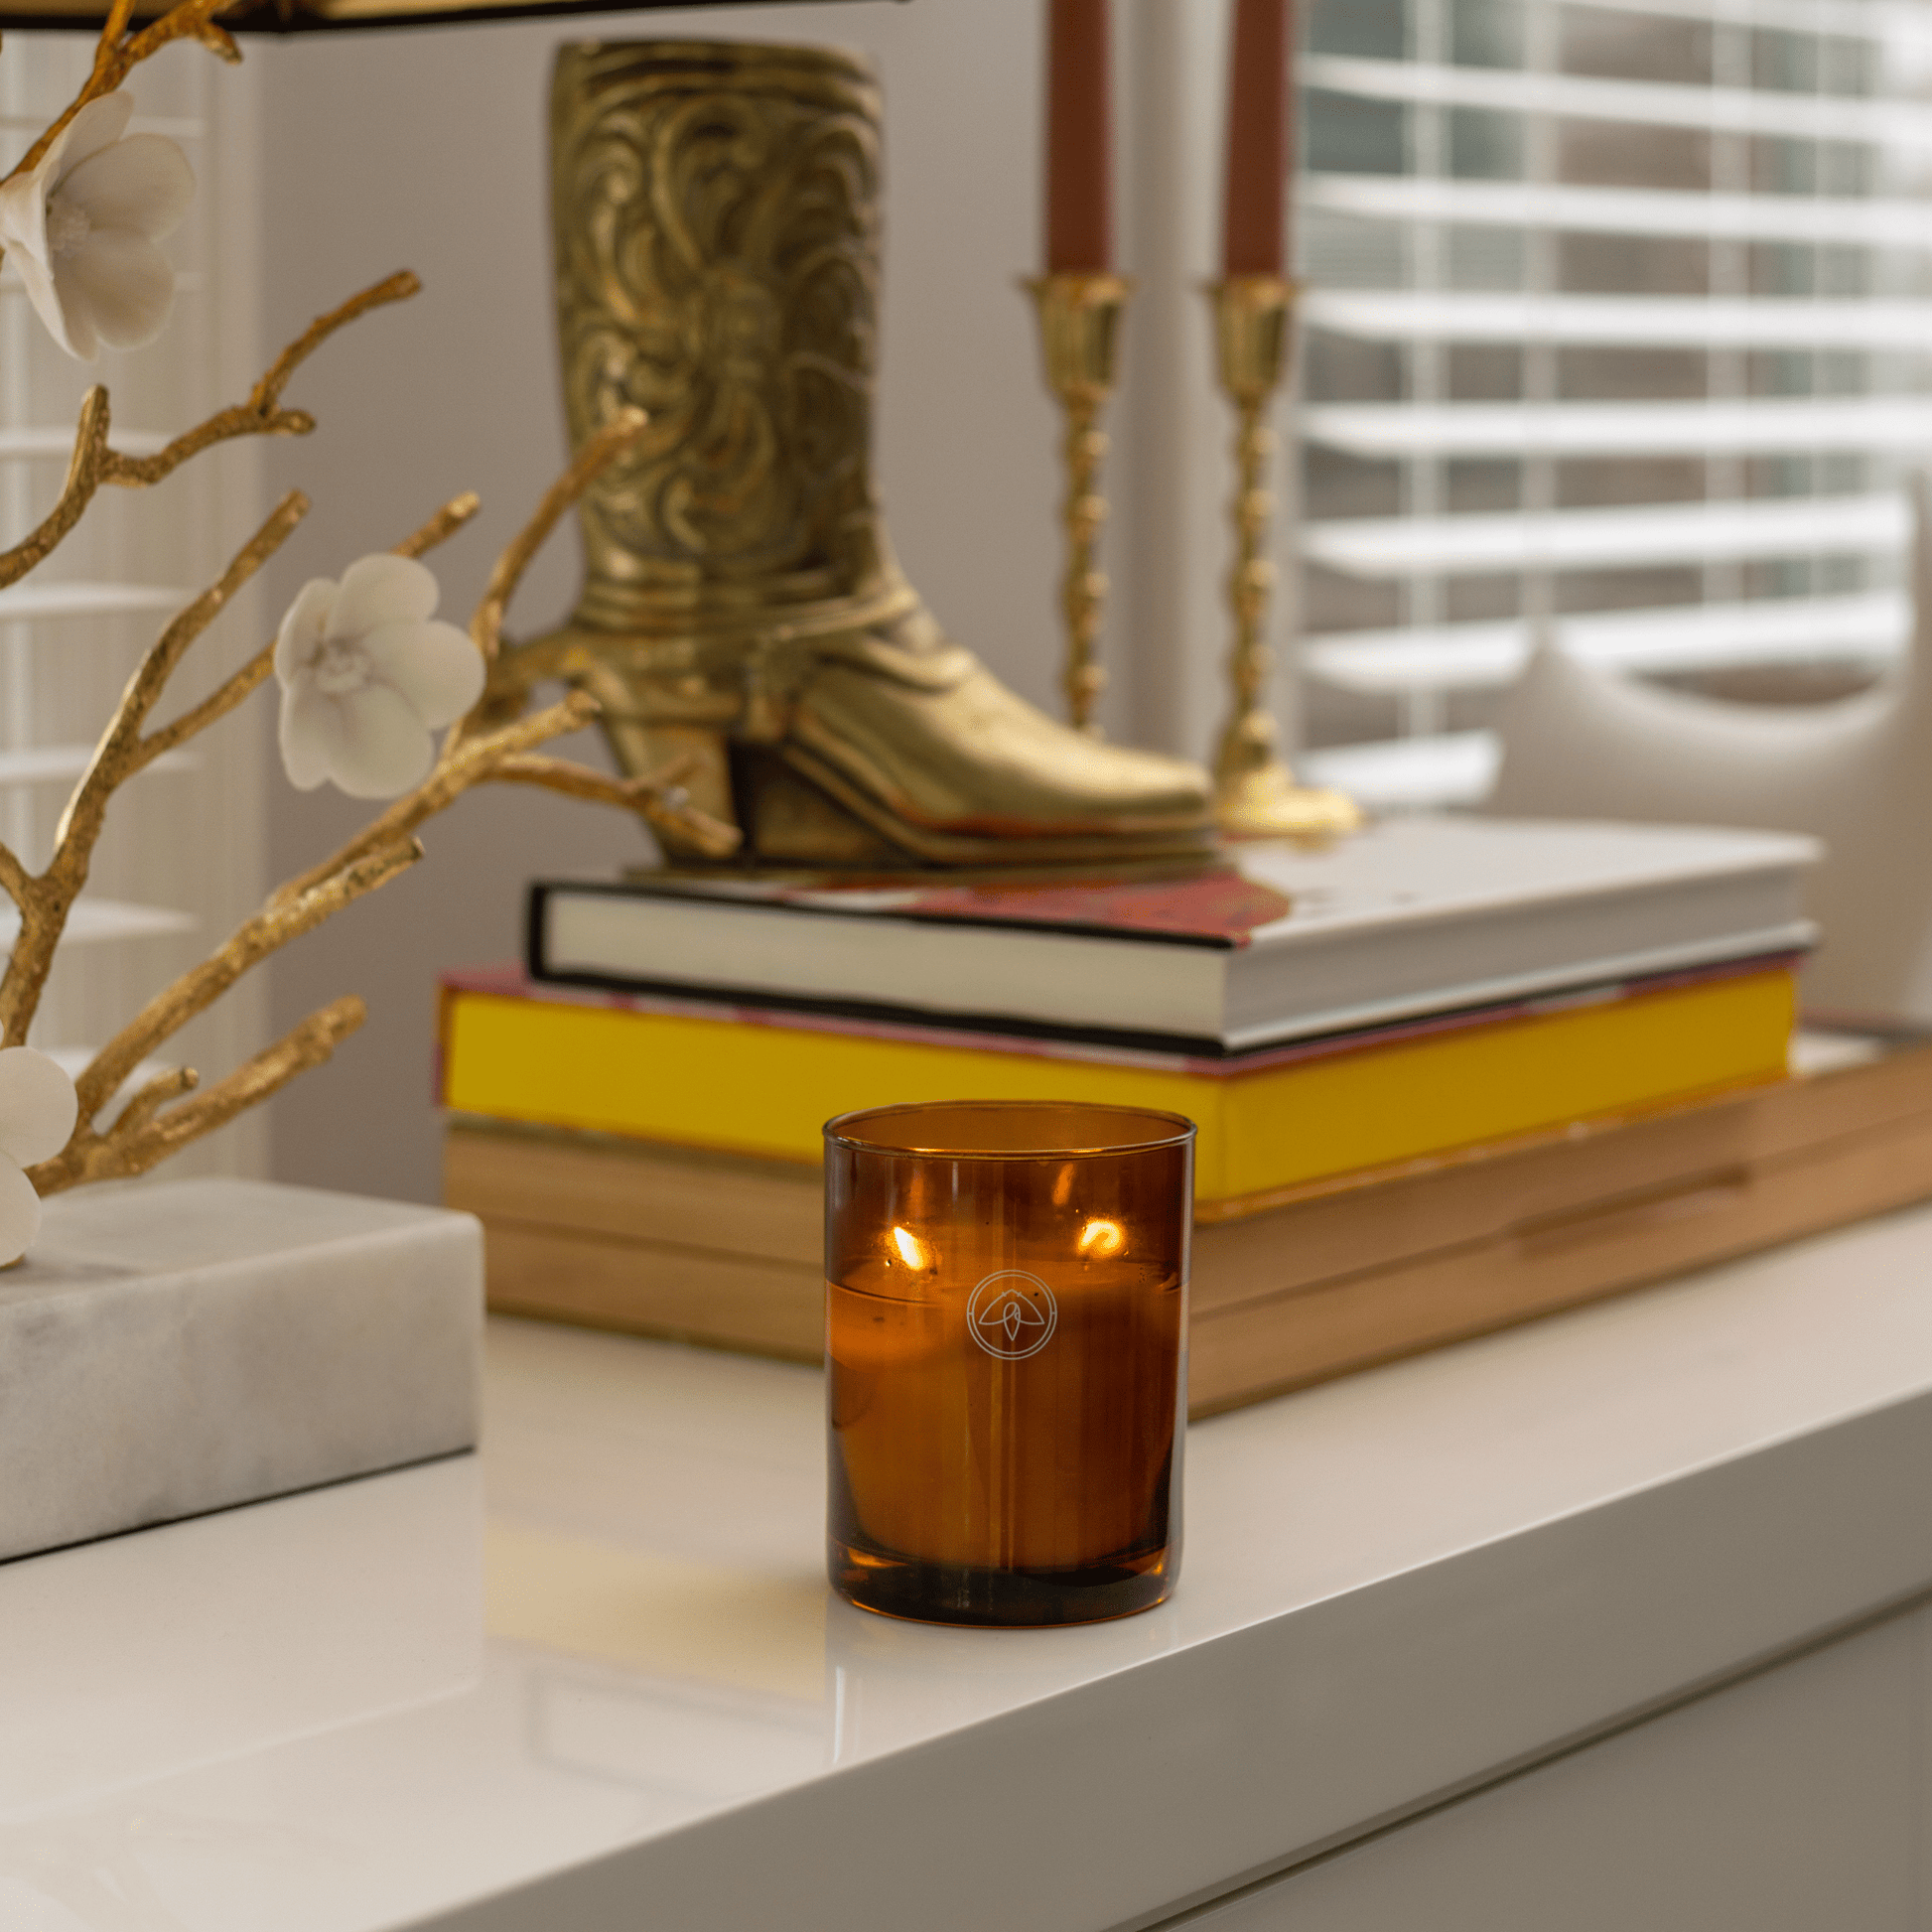 10oz Glow two wick canlde on white table with books, metal boot decor and candlesticks with window in background